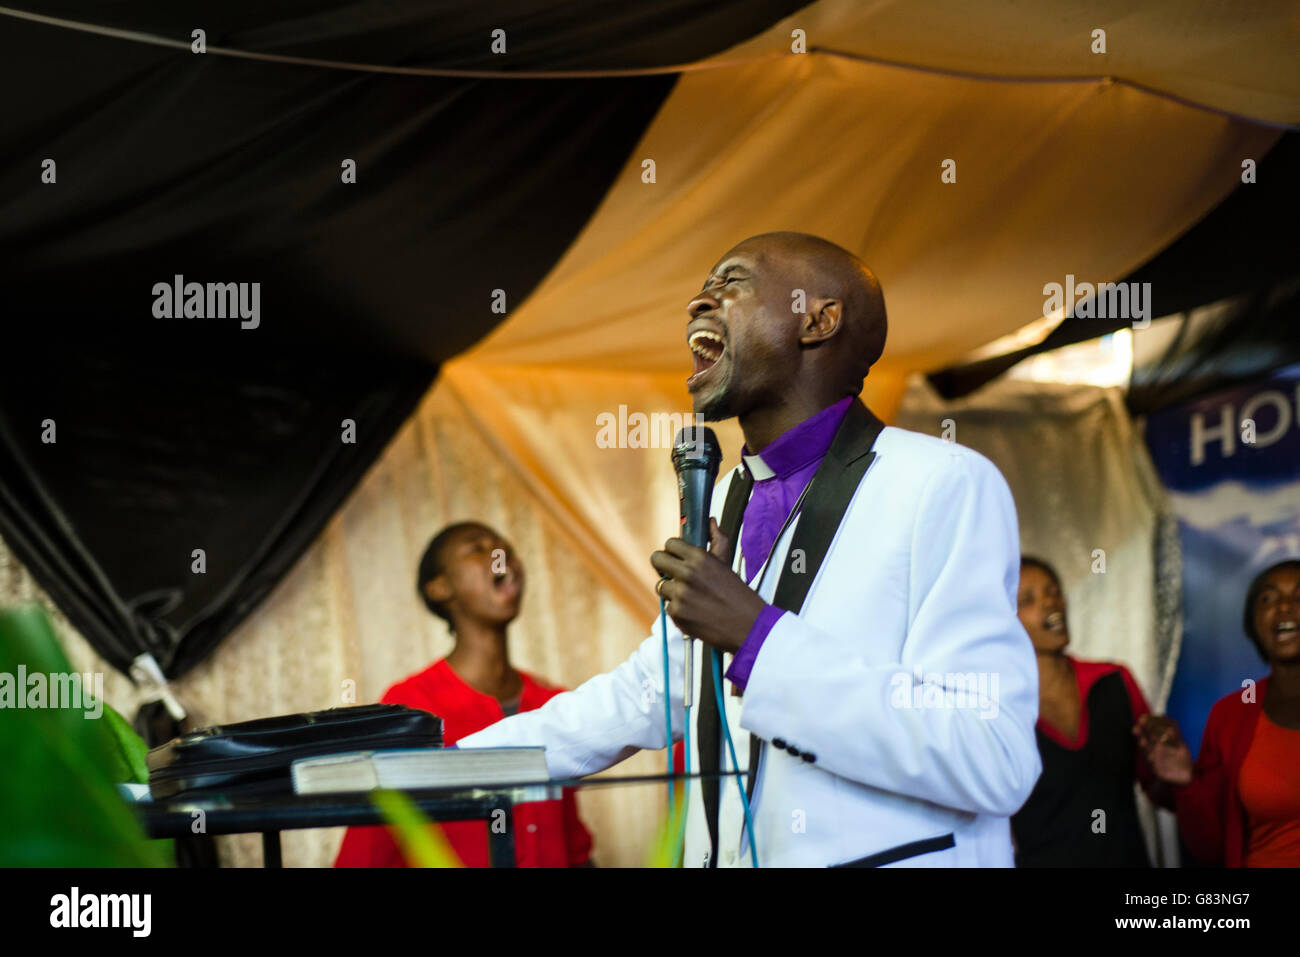 Prophet Chibwe Katebe sings the song for Jesus during a Sunday service at the House of Prayer for All Nations in Livingstone, Zambia. Stock Photo